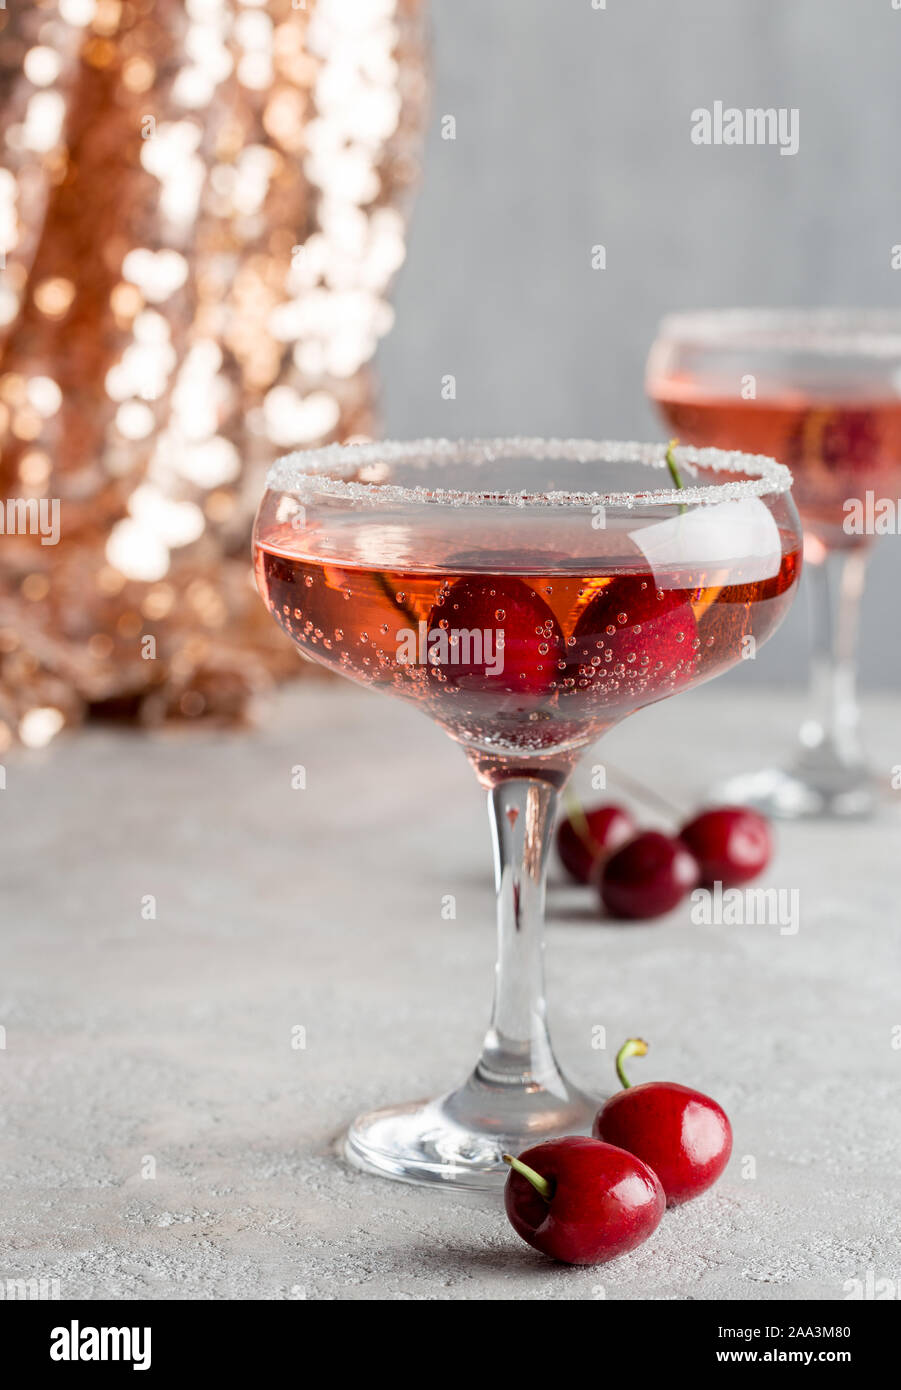 Alcohol sparking drink in champagne glasses with sweet cherry in it. Concept of holiday beverages Stock Photo